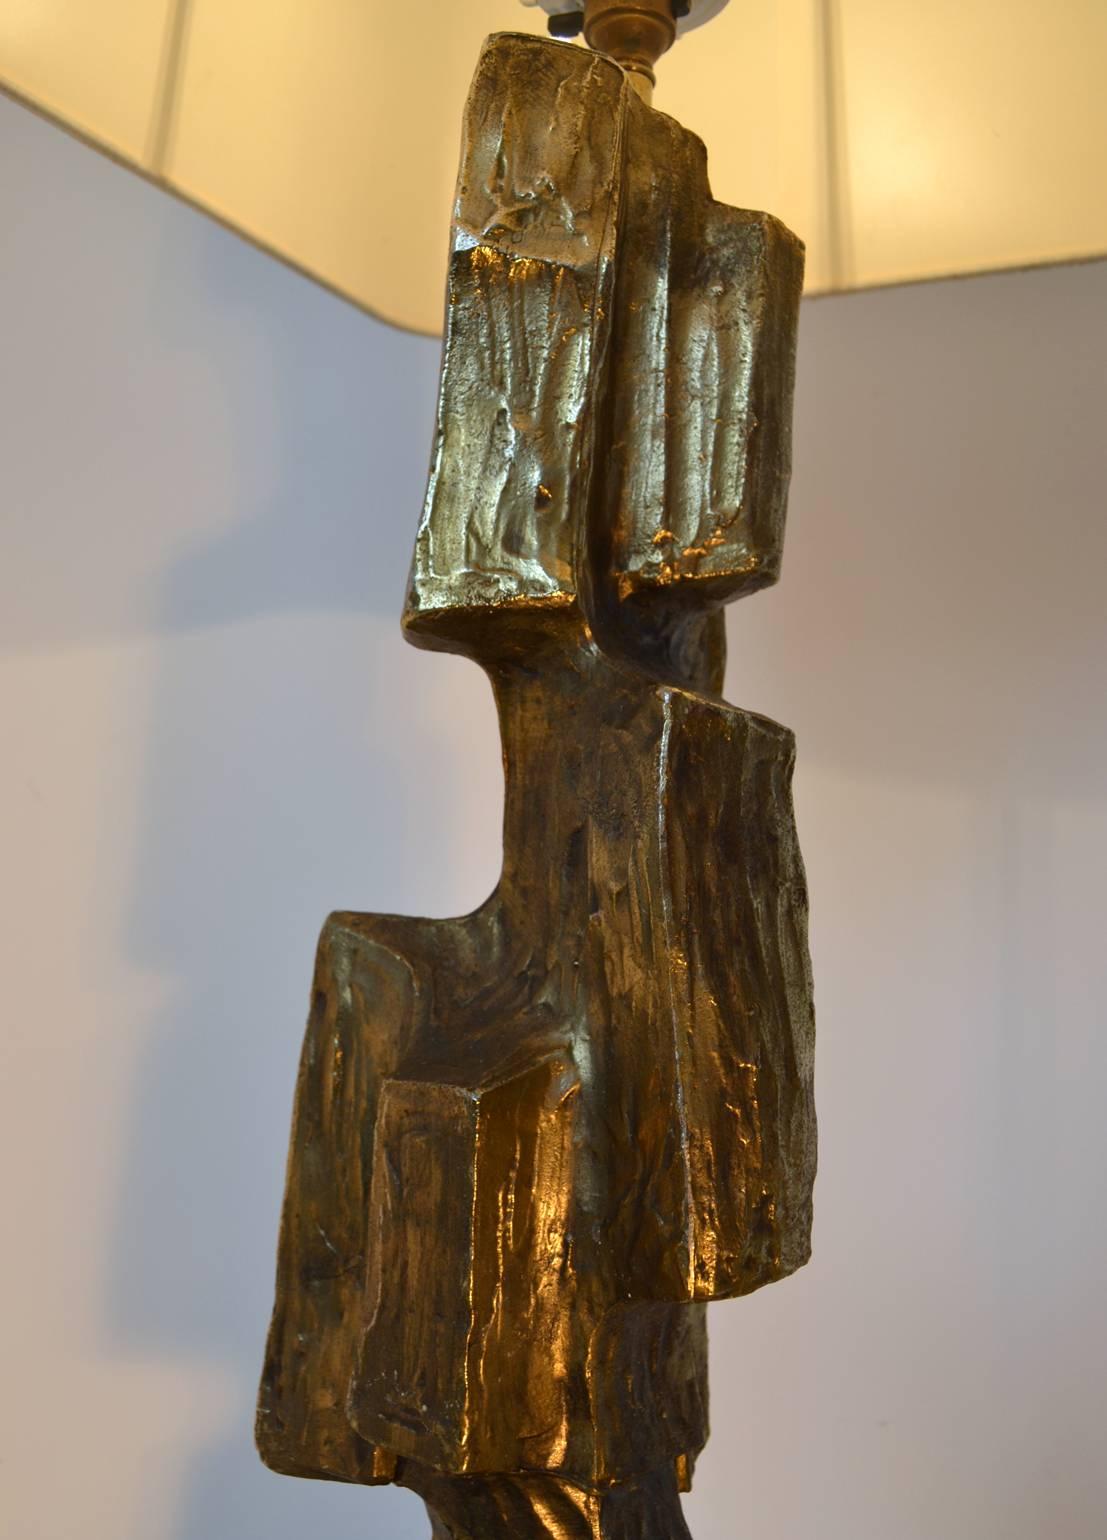 20th Century Large Brutalist Cubist Table Lamp by Maurizio Tempestini 1970's